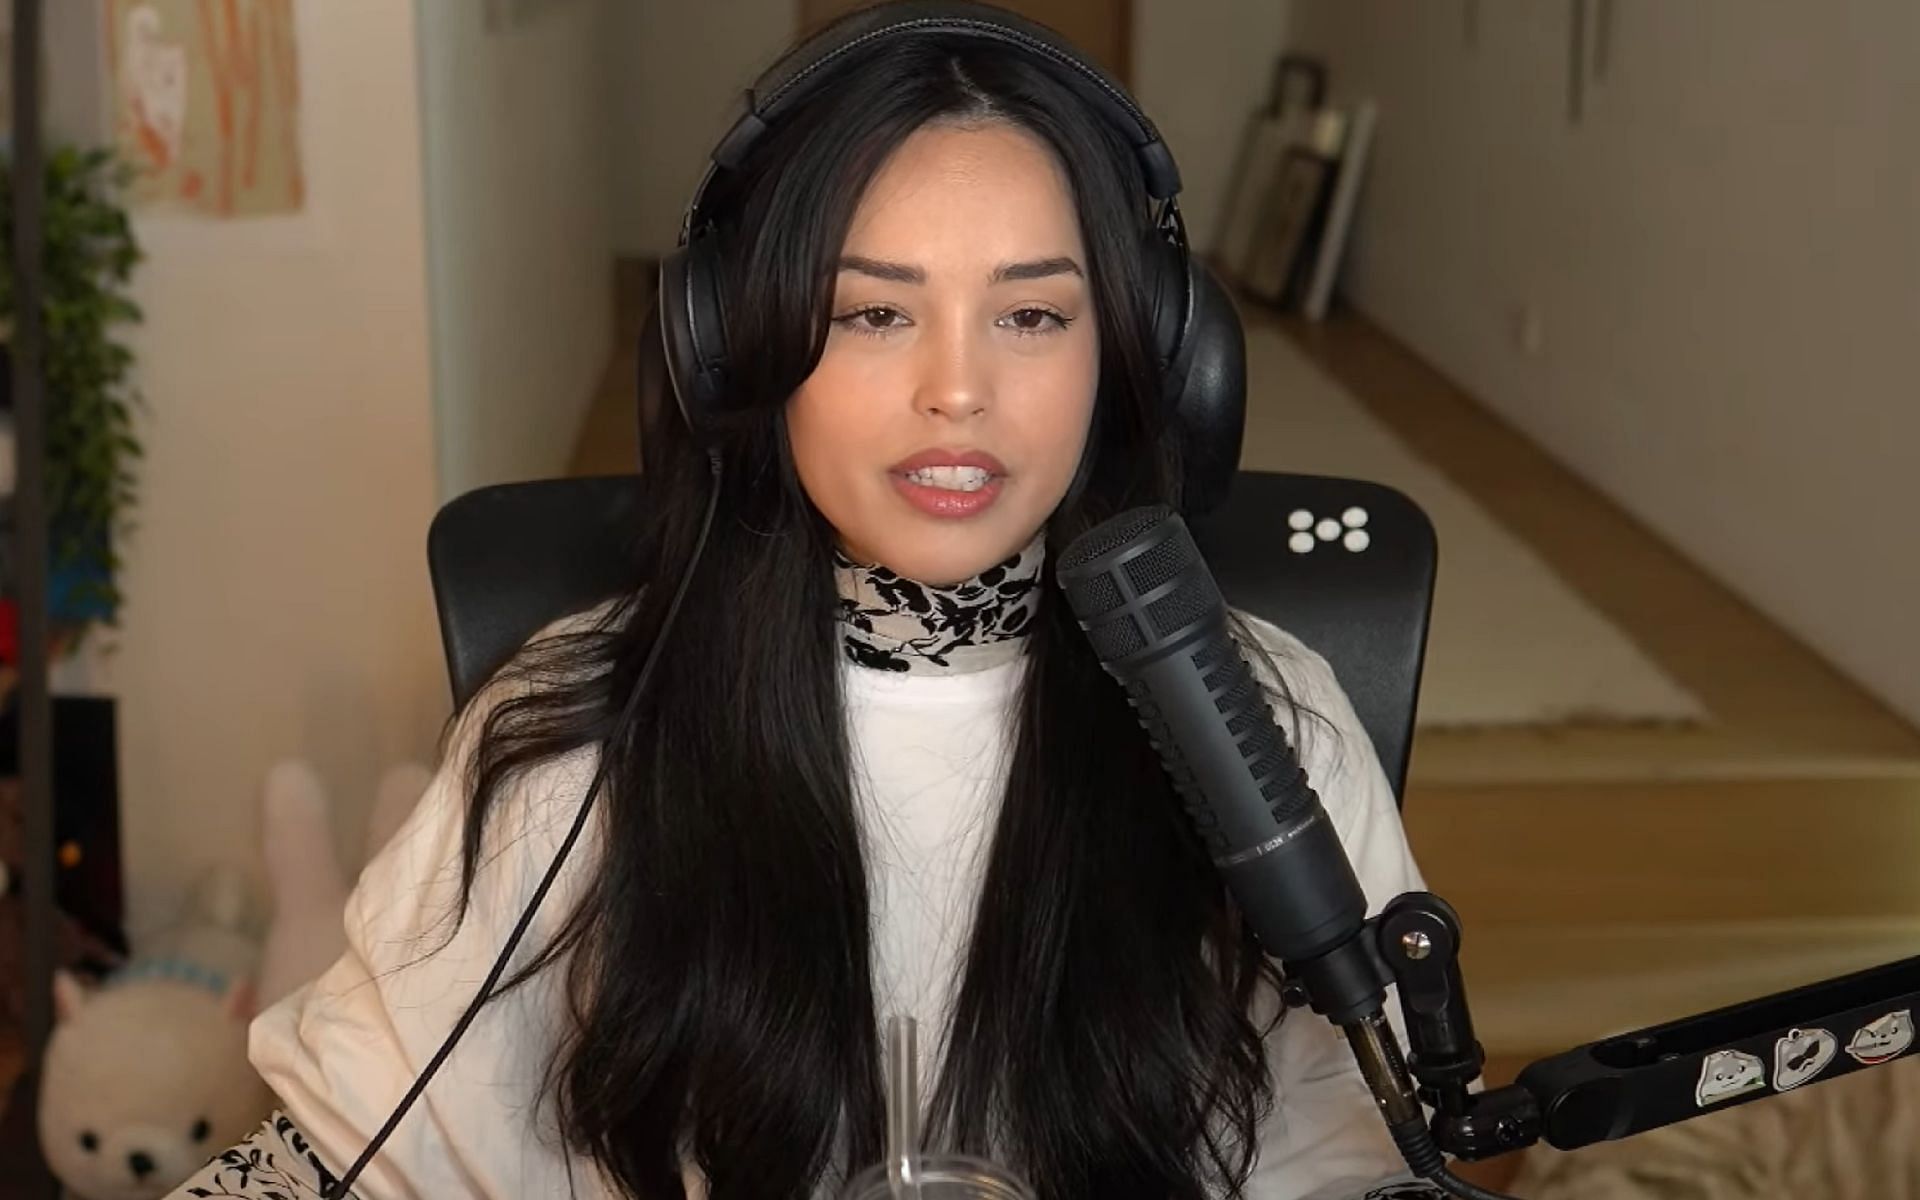 Valkyrae says GTA 5 RP viewers are &quot;cowardly and demanding&quot;